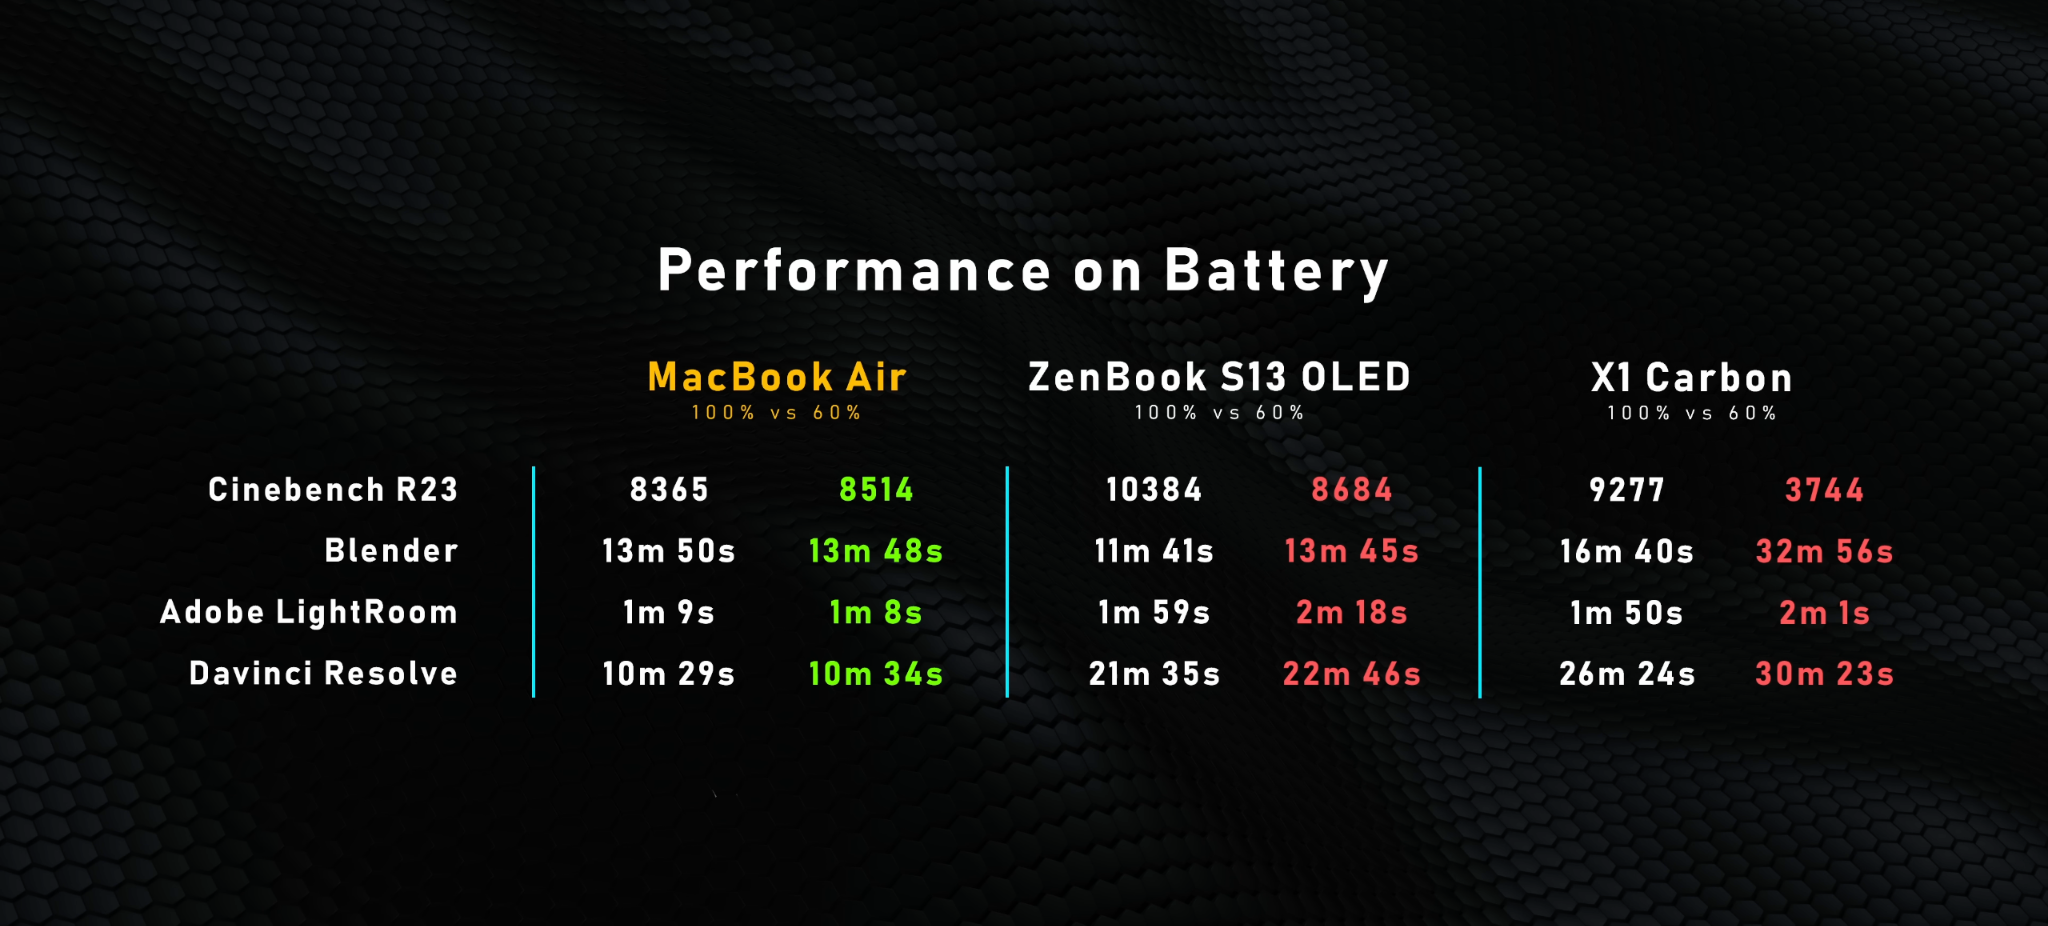 MacBook Air battery performance compared to other laptops